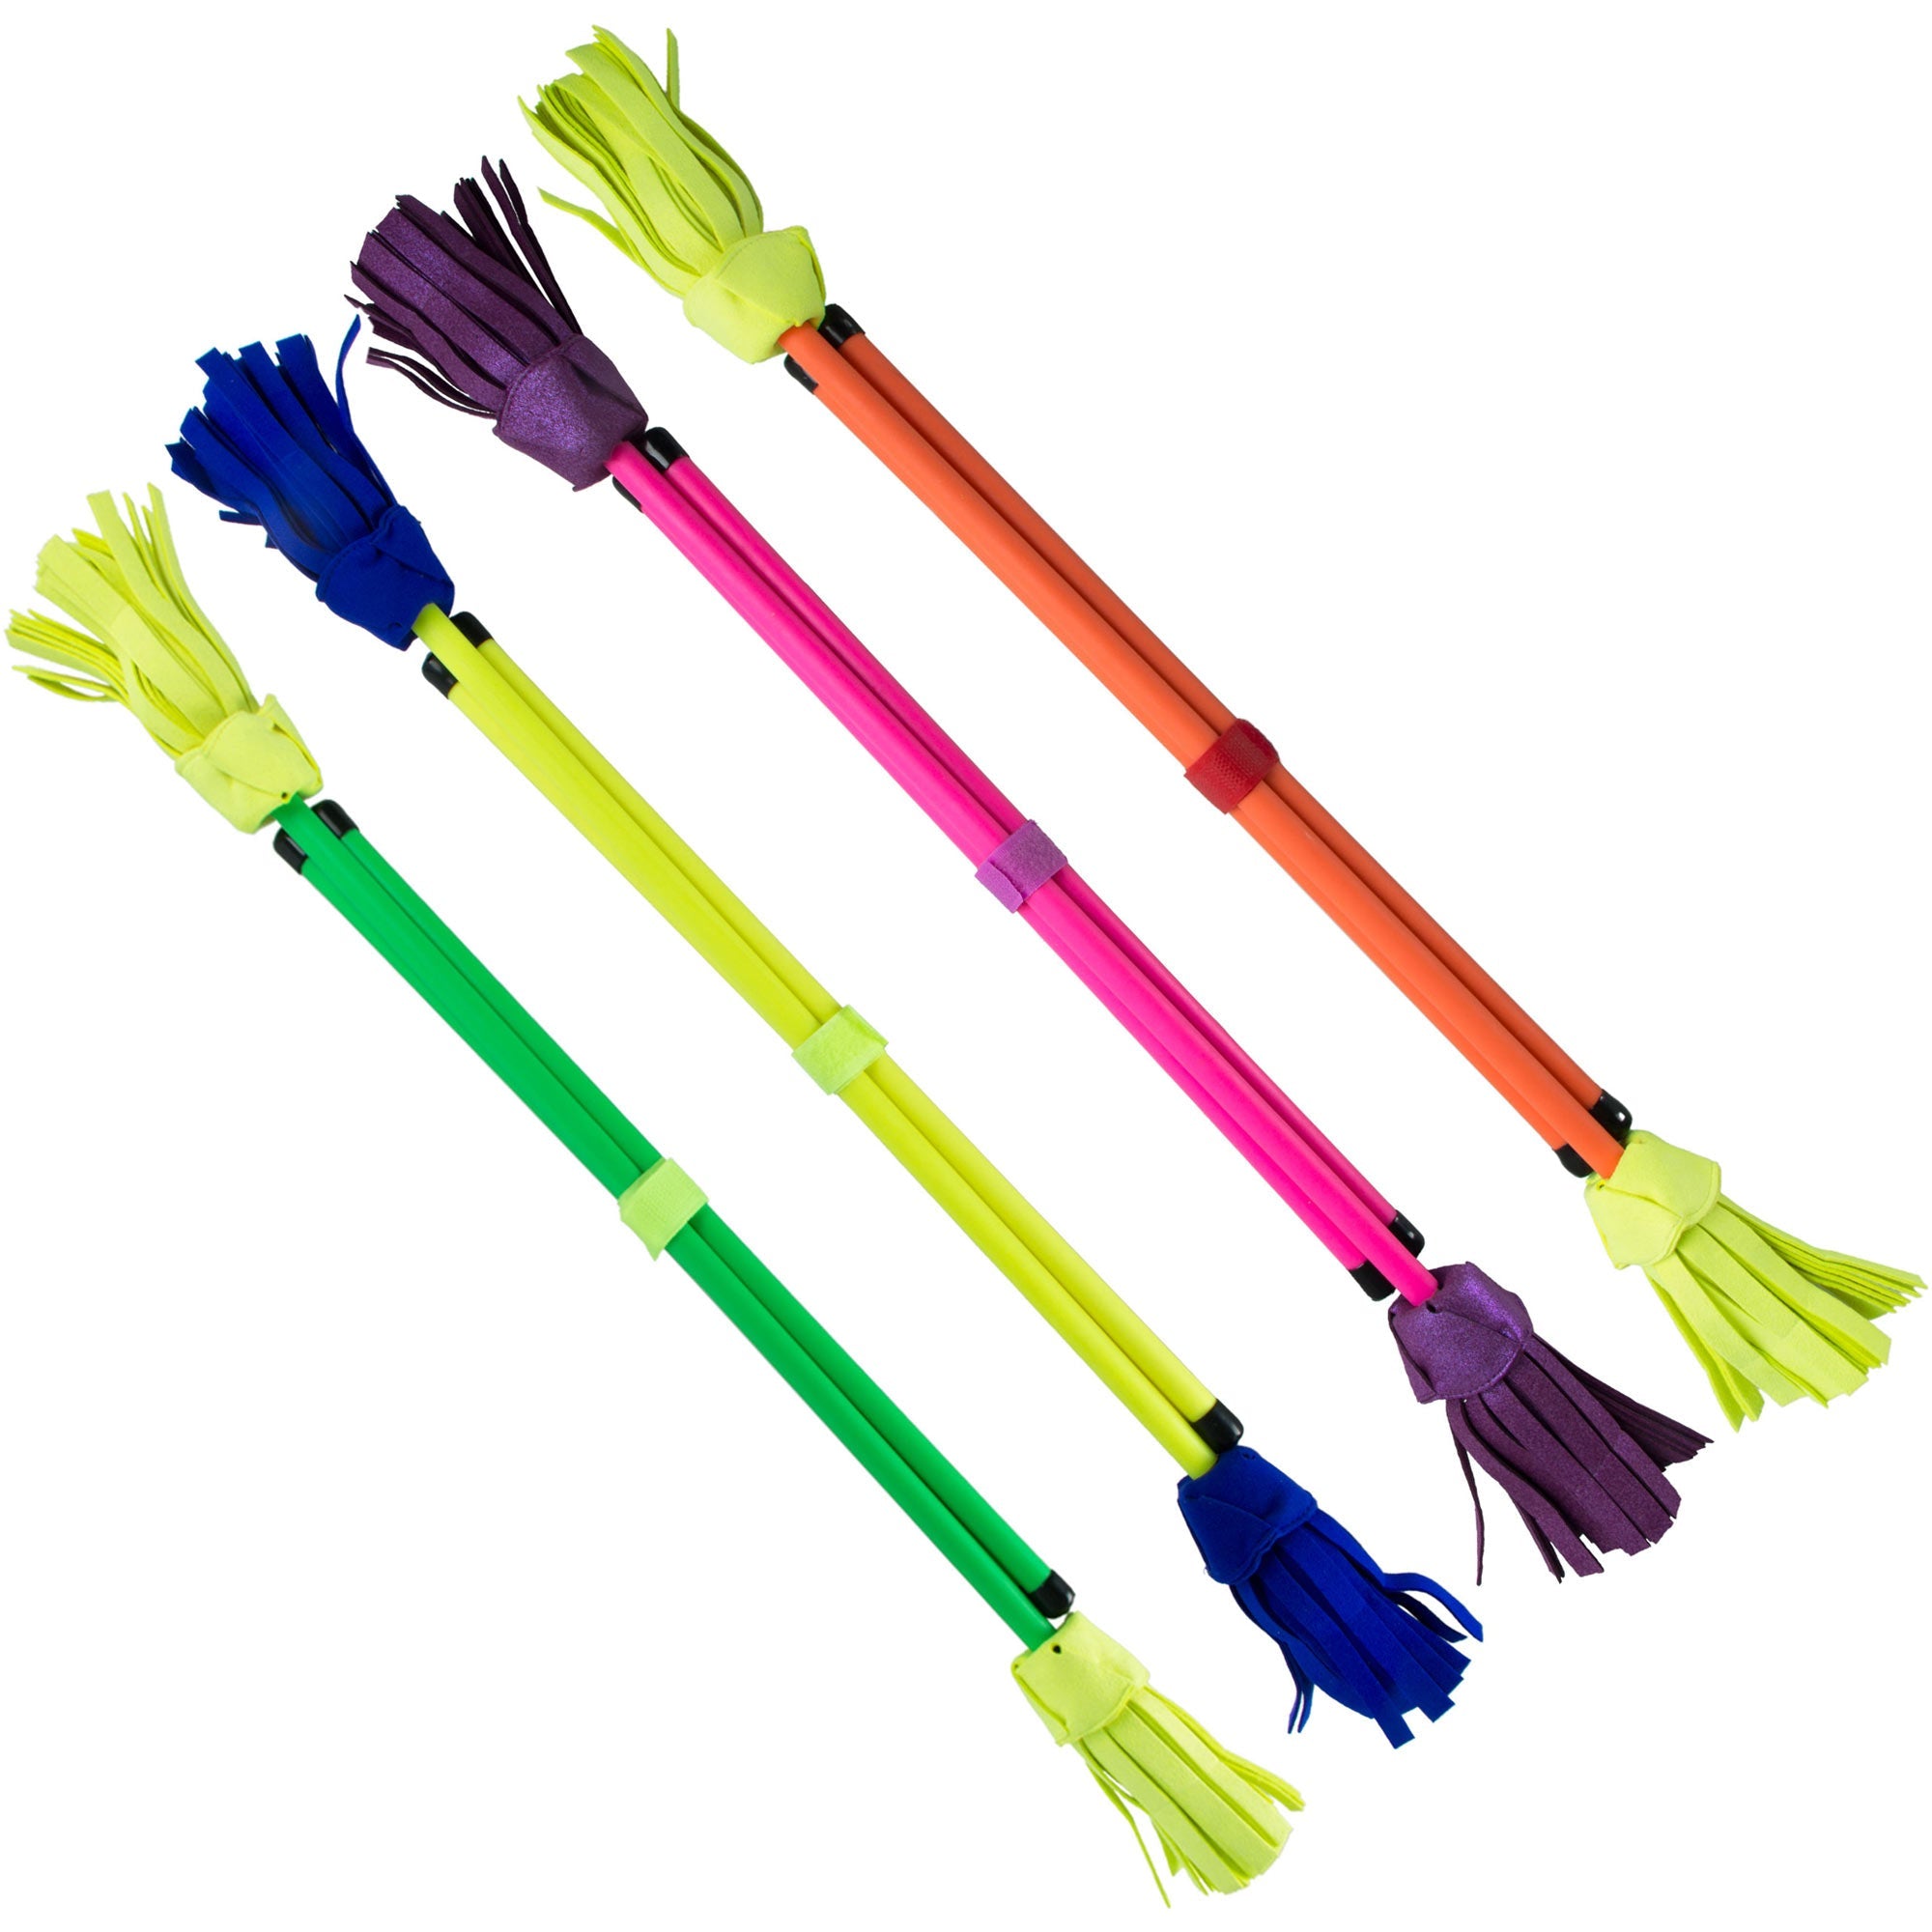 4 brightly coloured Neo flowersticks in a row